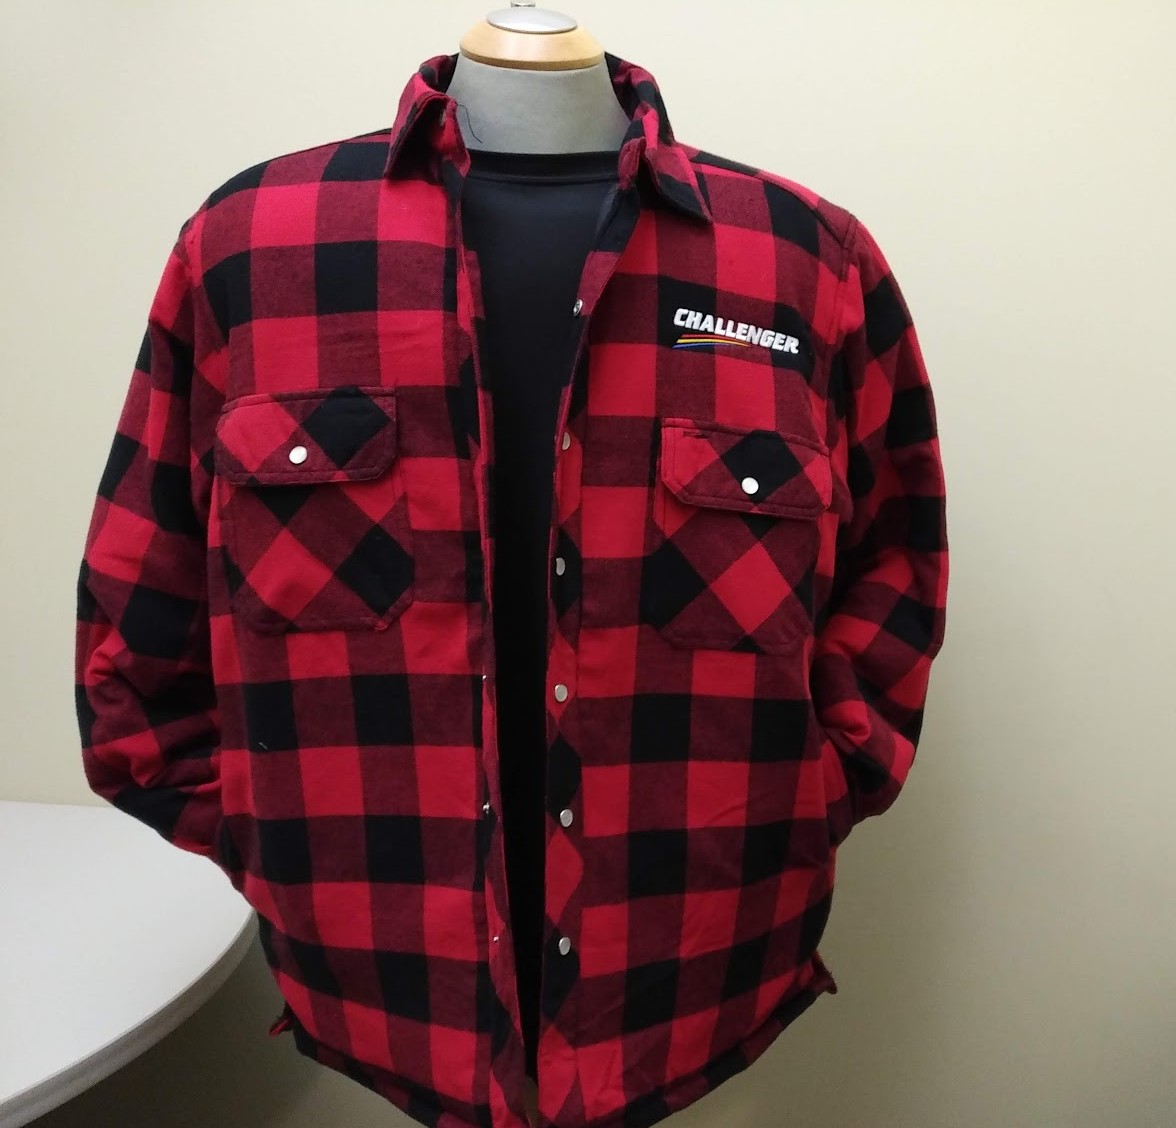 Challenger Gear Red Plaid Jacket